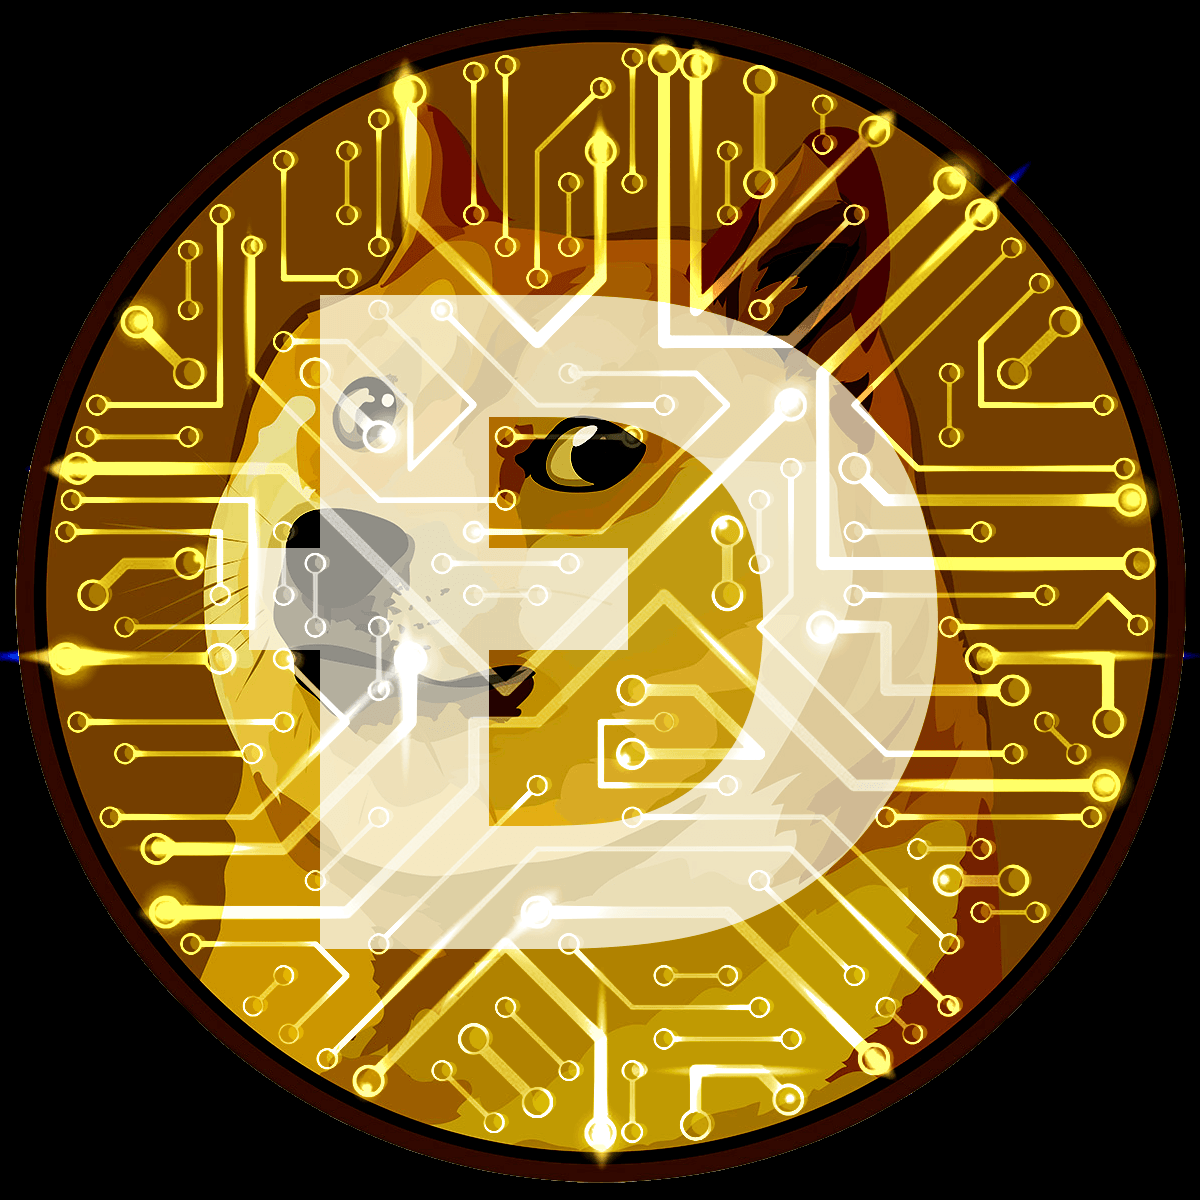 Dogecoin Logo - Playing around with making a Dogecoin logo. What do ya think? : dogecoin